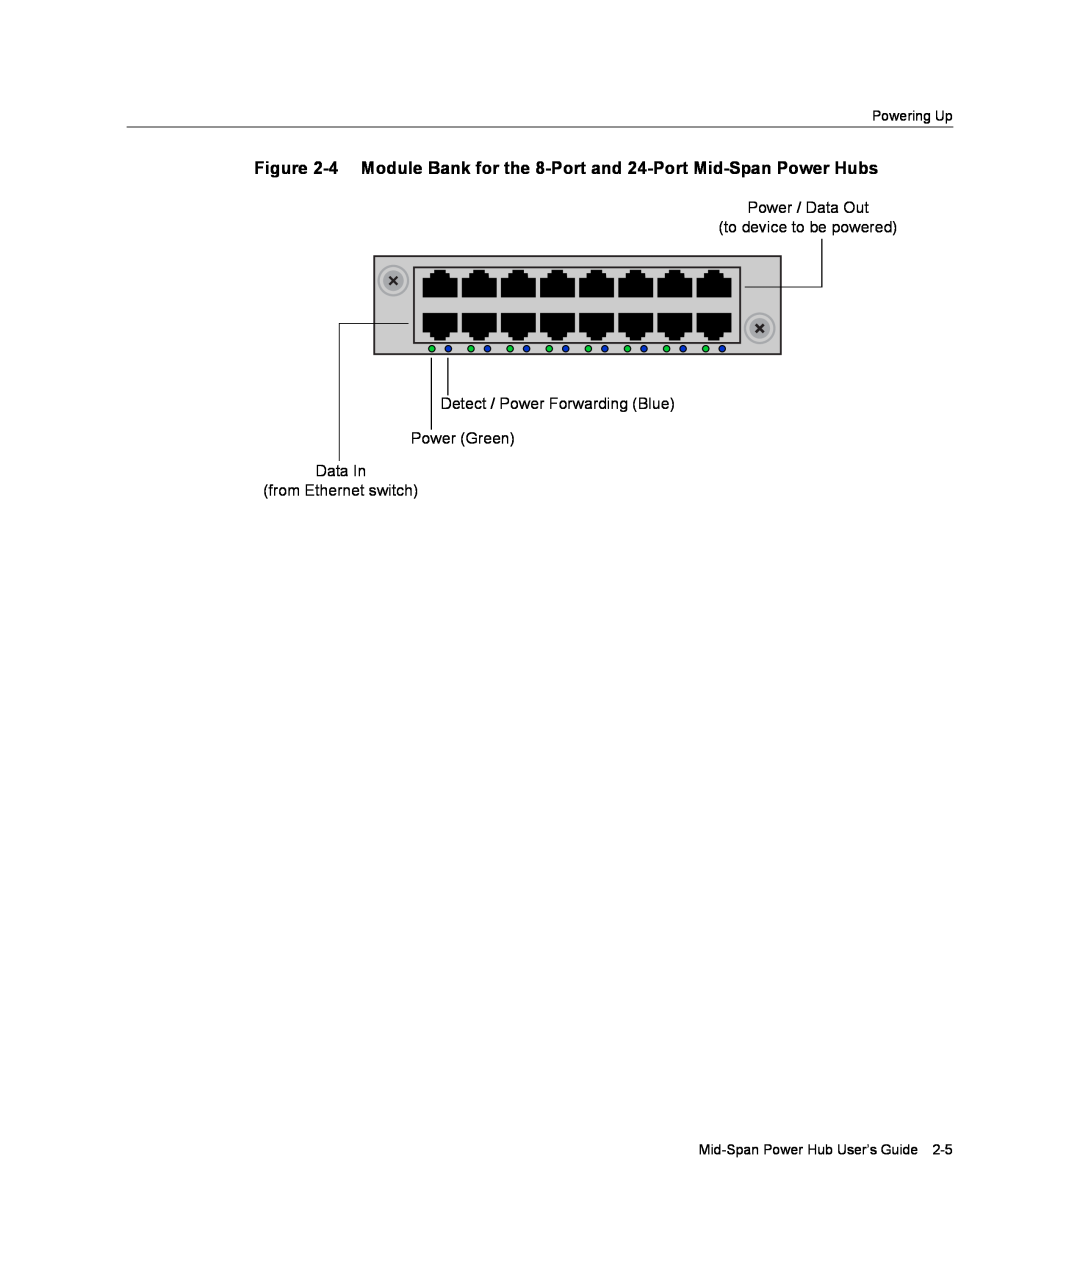 Enterasys Networks BL-6000ENT manual 4 Module Bank for the 8-Port and 24-Port Mid-Span Power Hubs, from Ethernet switch 